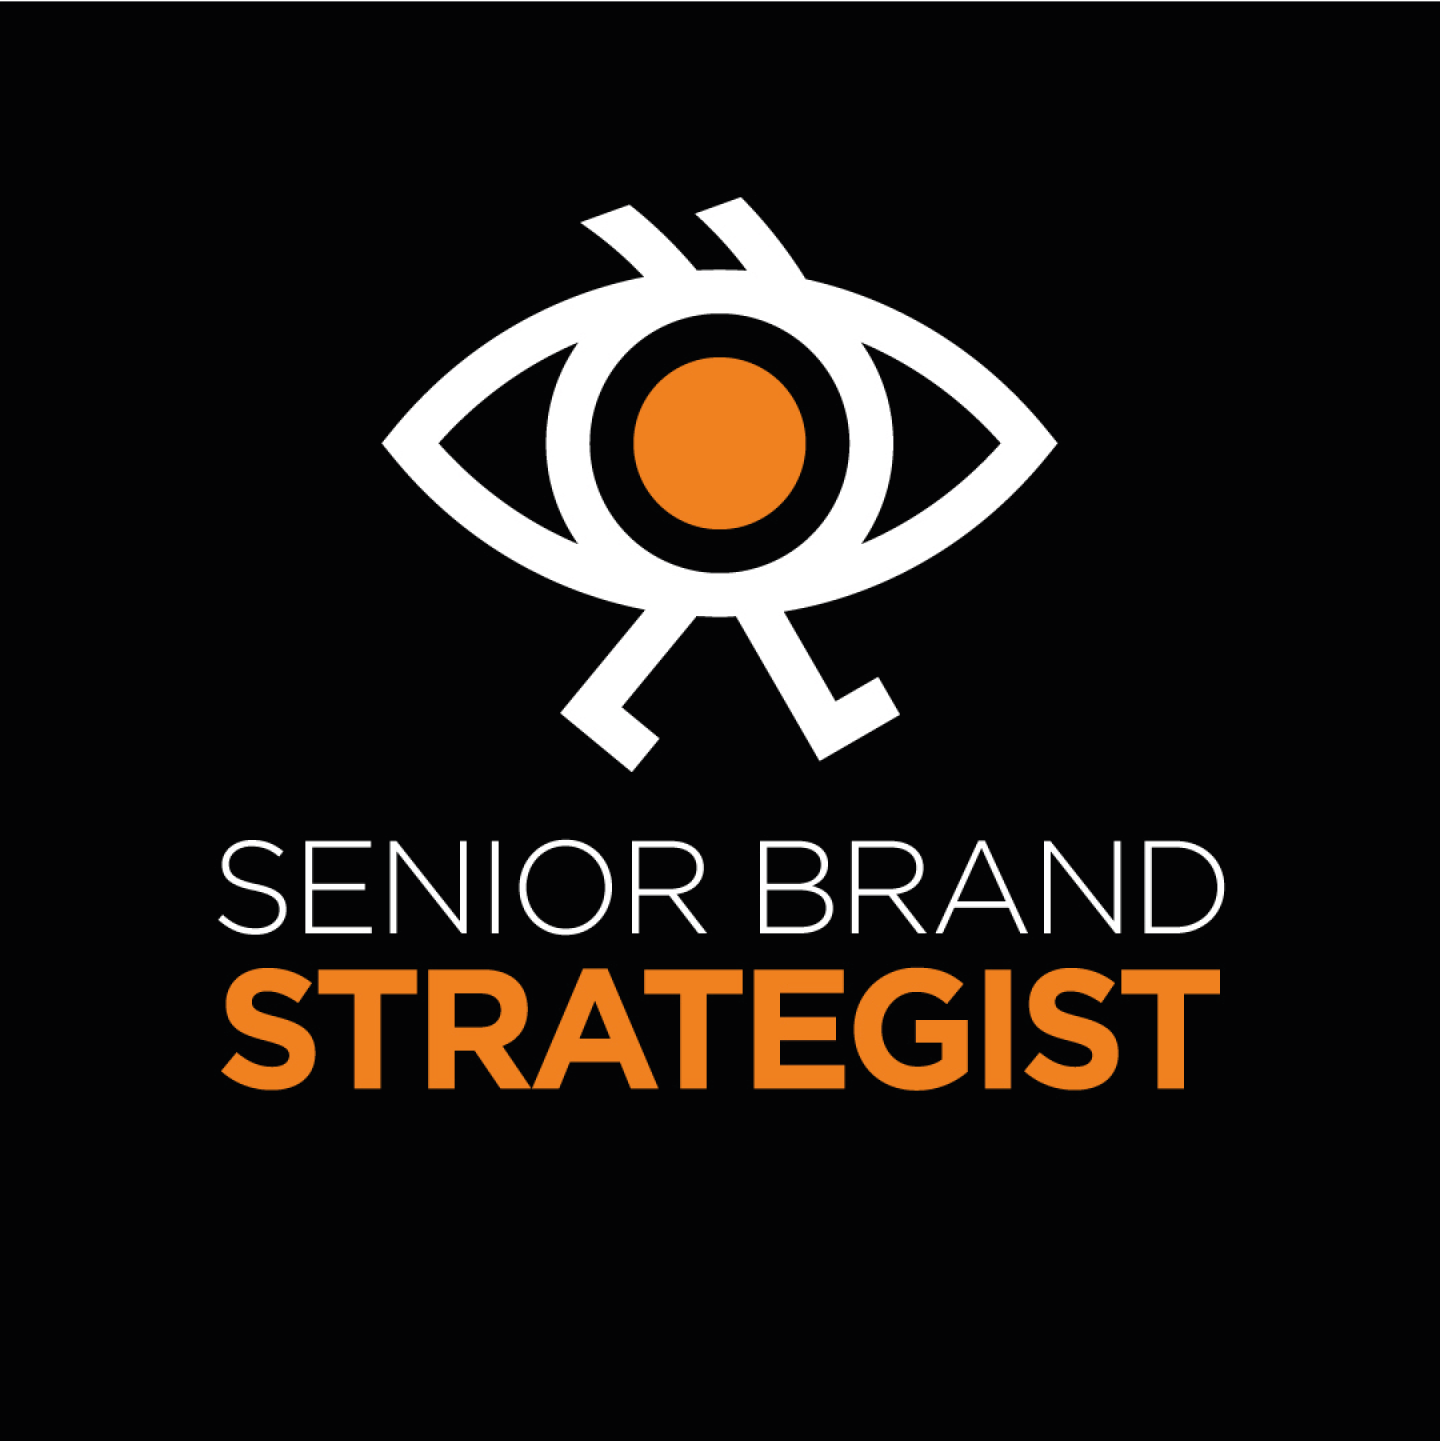 We are looking for NEW SENIOR BRAND STRATEGIST